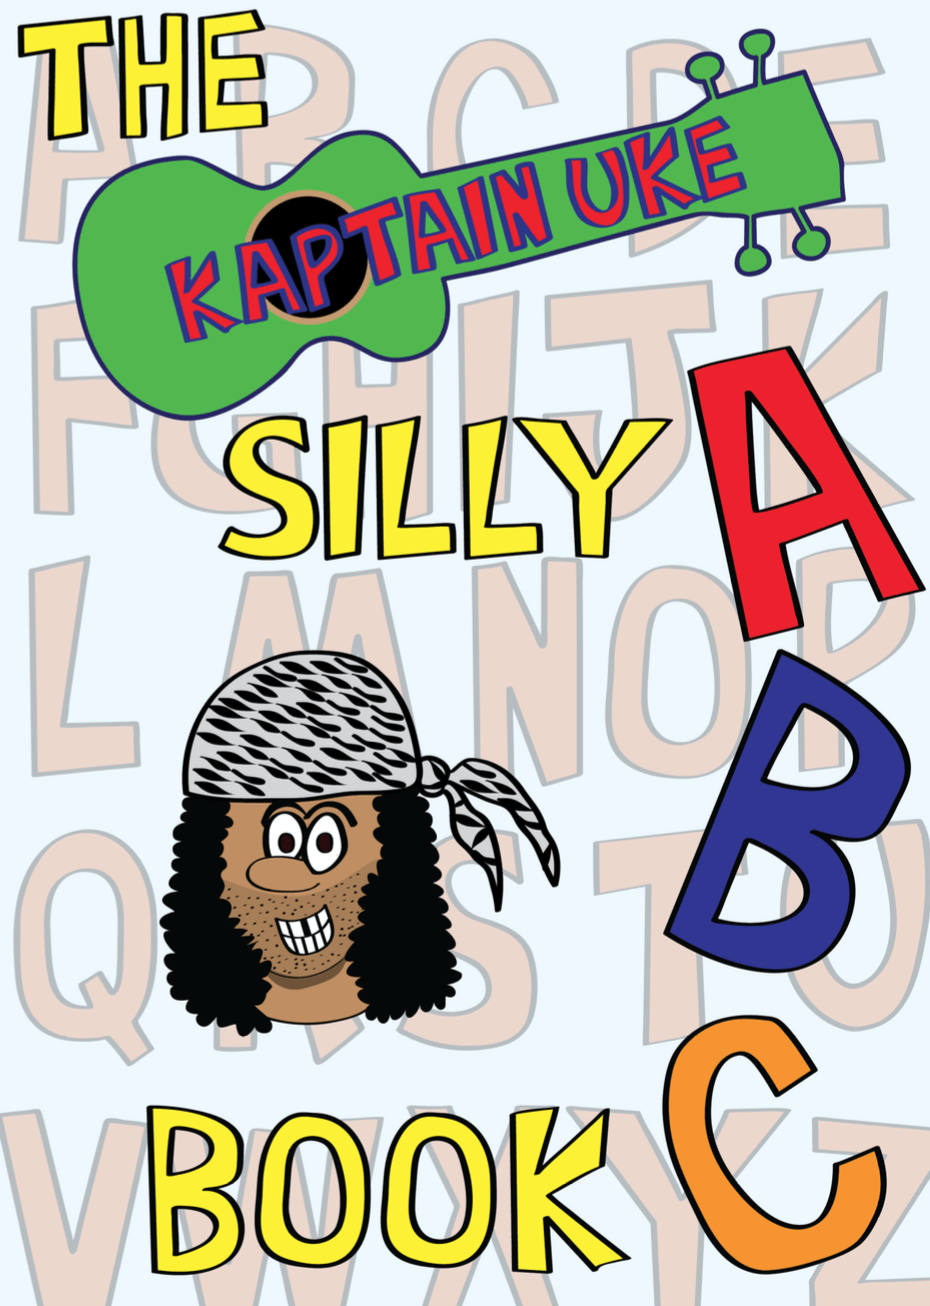 The Silly ABC Book